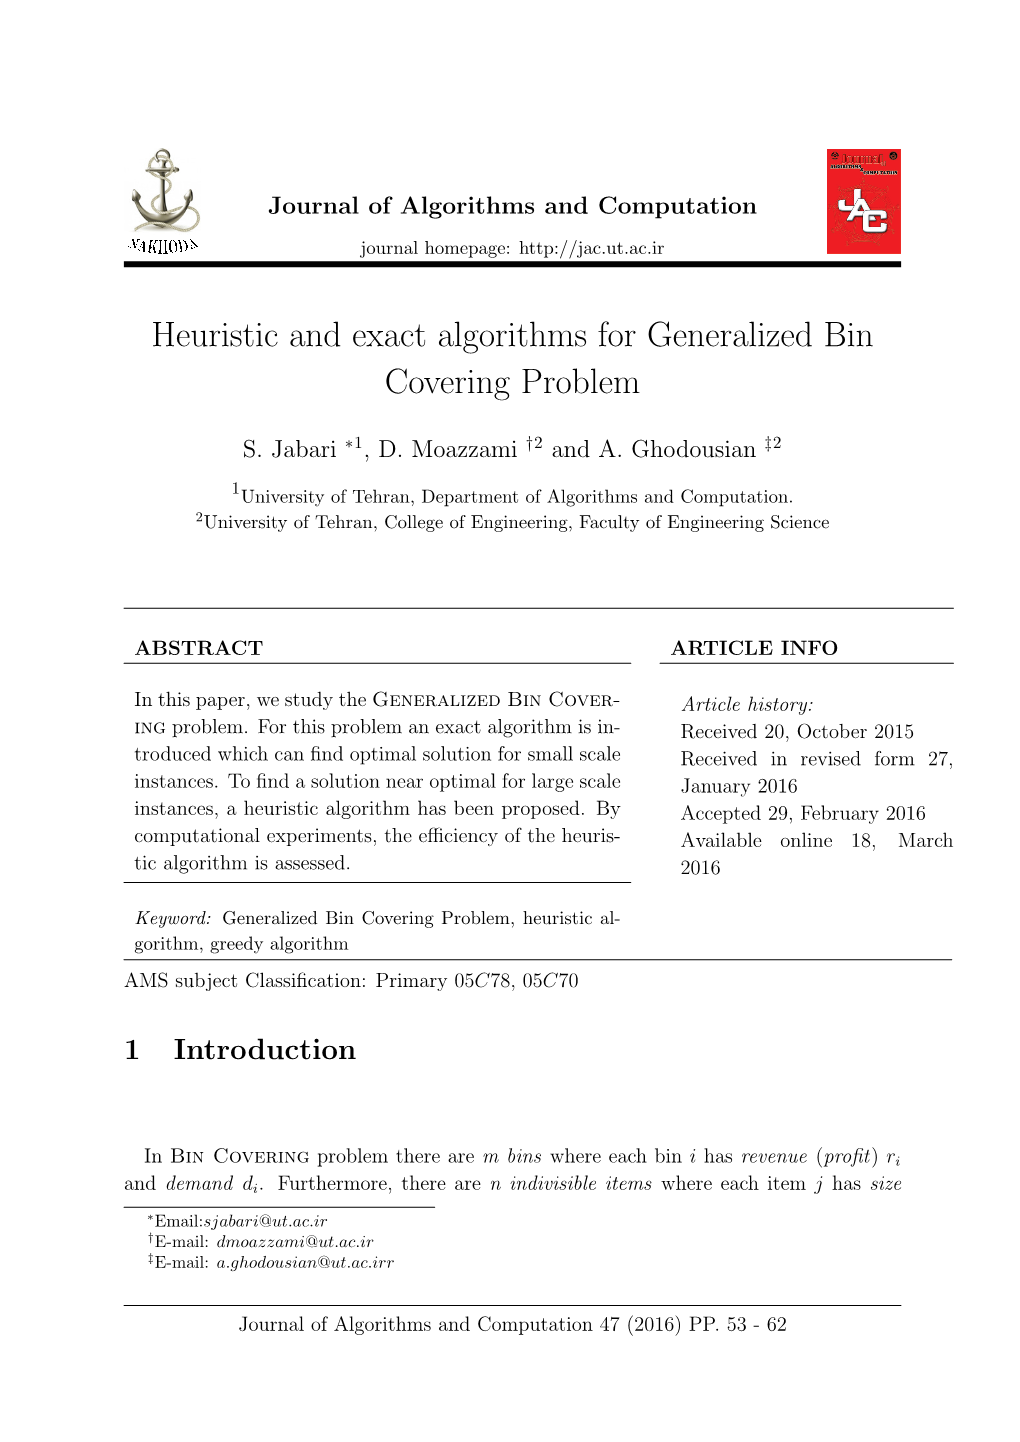 Heuristic and Exact Algorithms for Generalized Bin Covering Problem